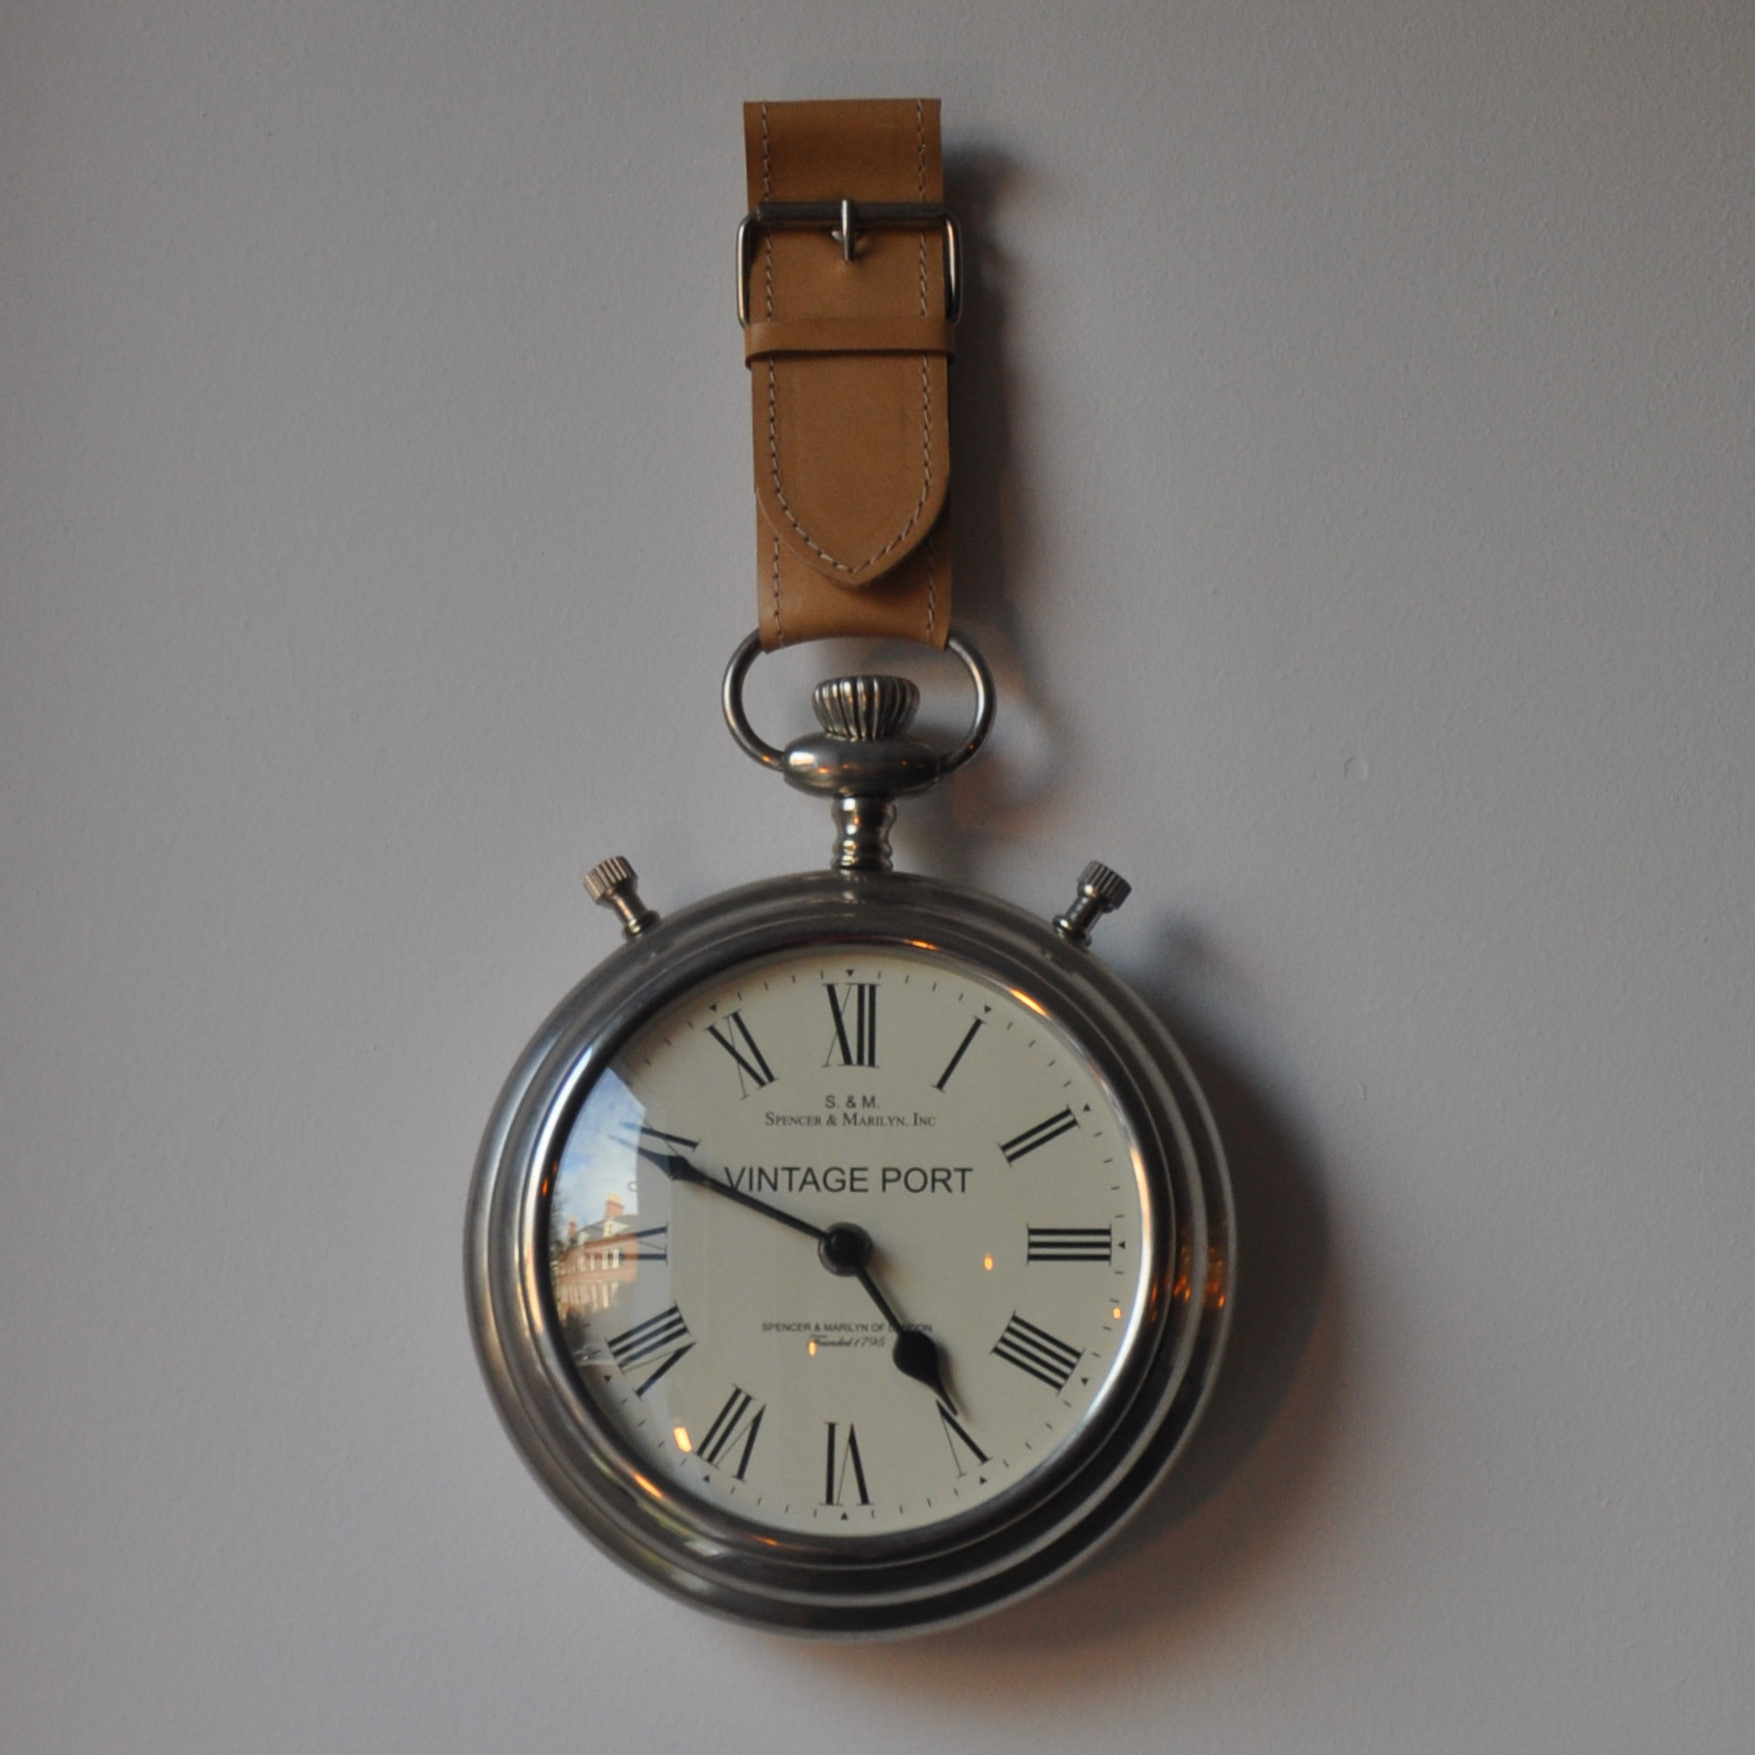 An over-sized pocket-watch, part of the Alice in Wonderland theme, which hangs on the wall by the door at The Pocket in Belfast.